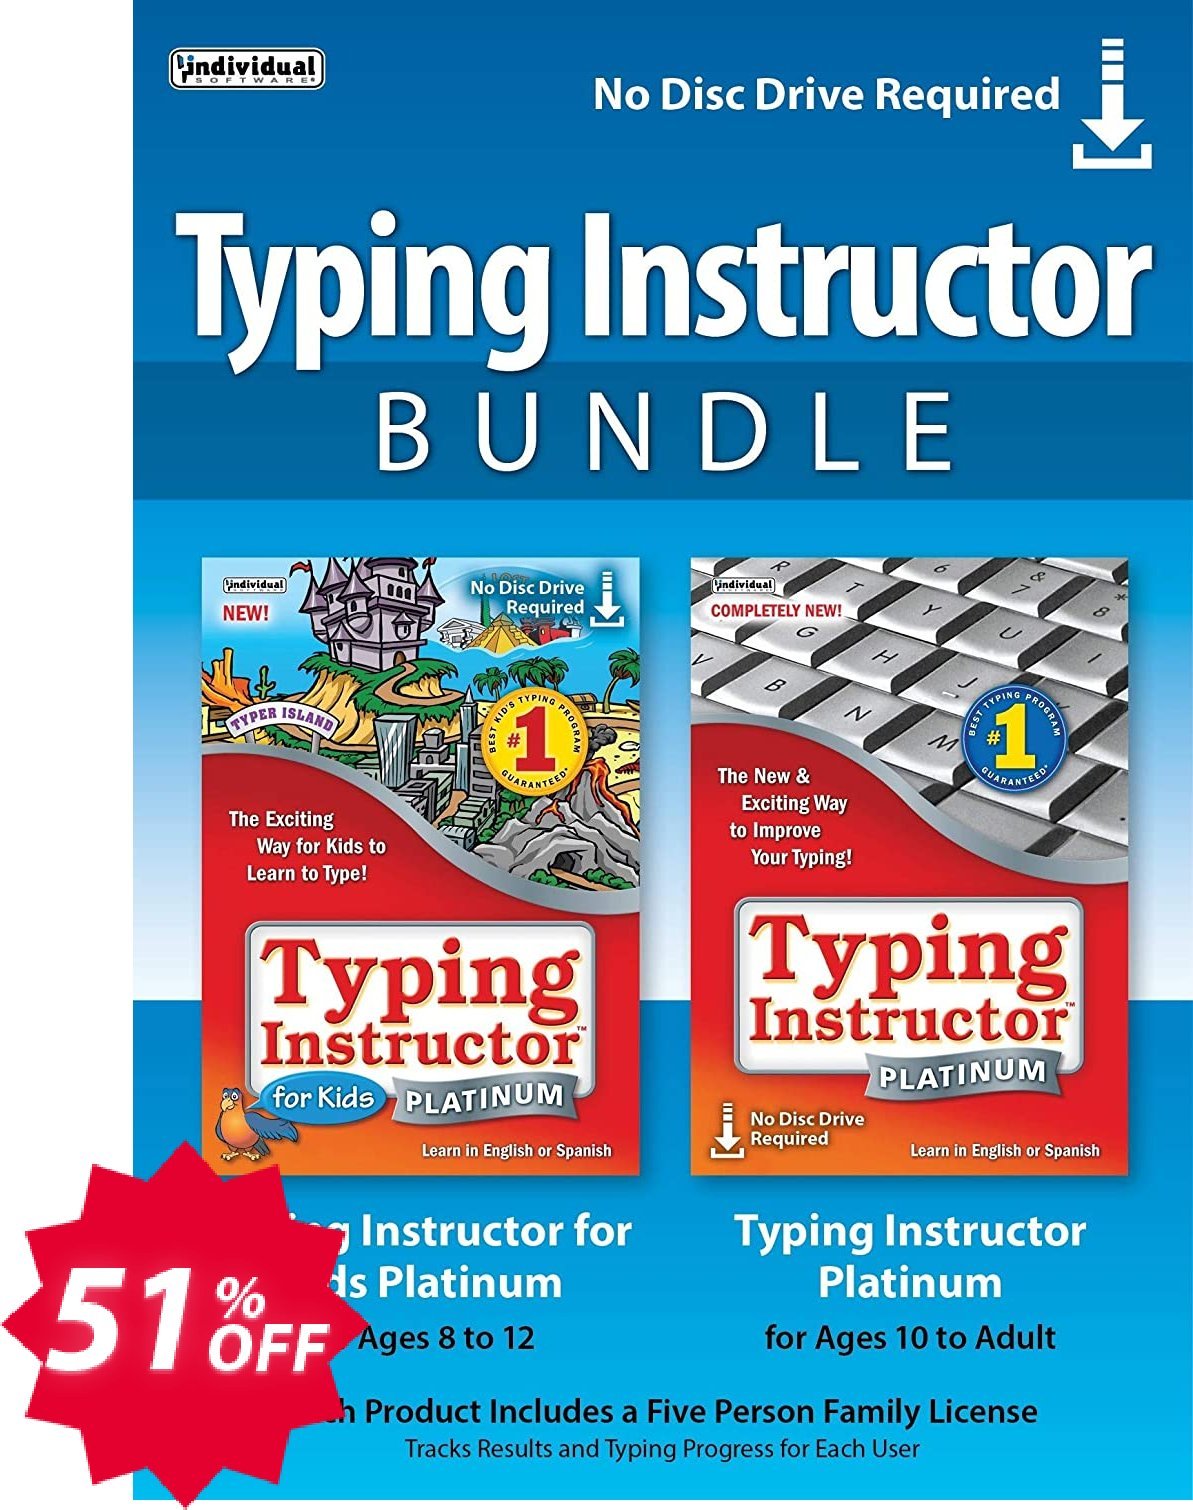 Typing Instructor Bundle: Typing Instructor for Kids Platinum & Typing Instructor Platinum Coupon code 51% discount 